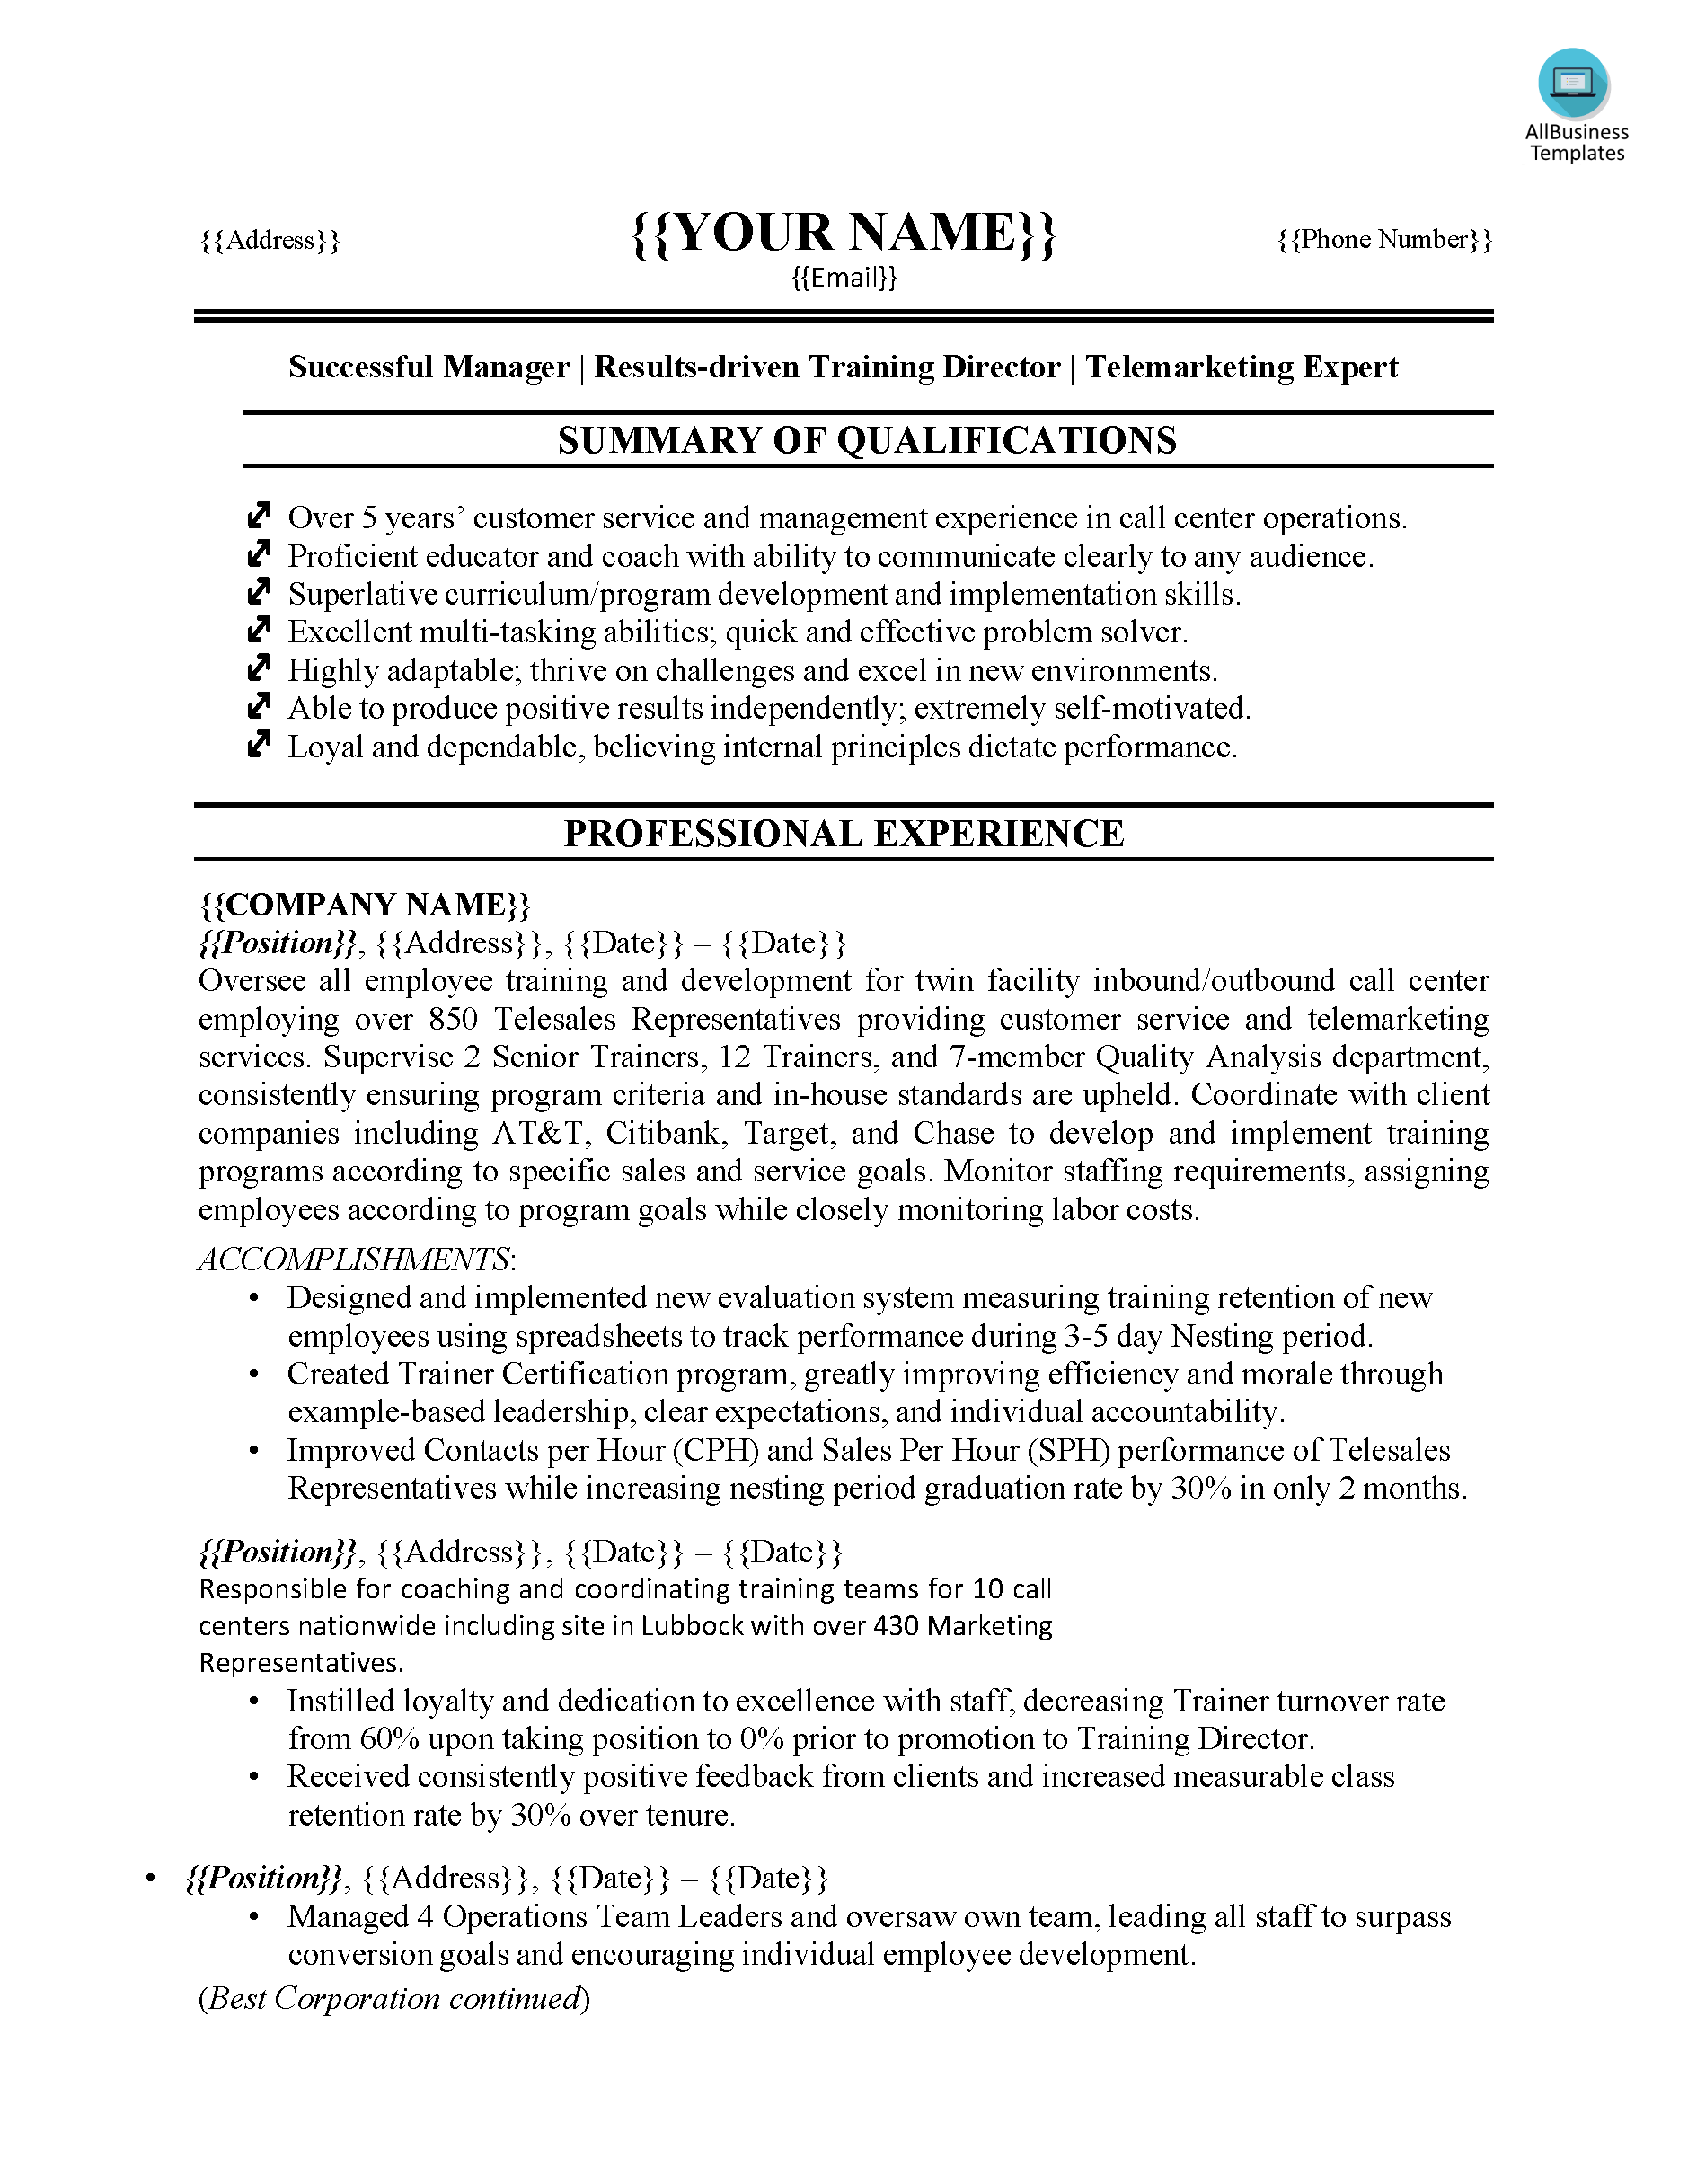 resume about customer services